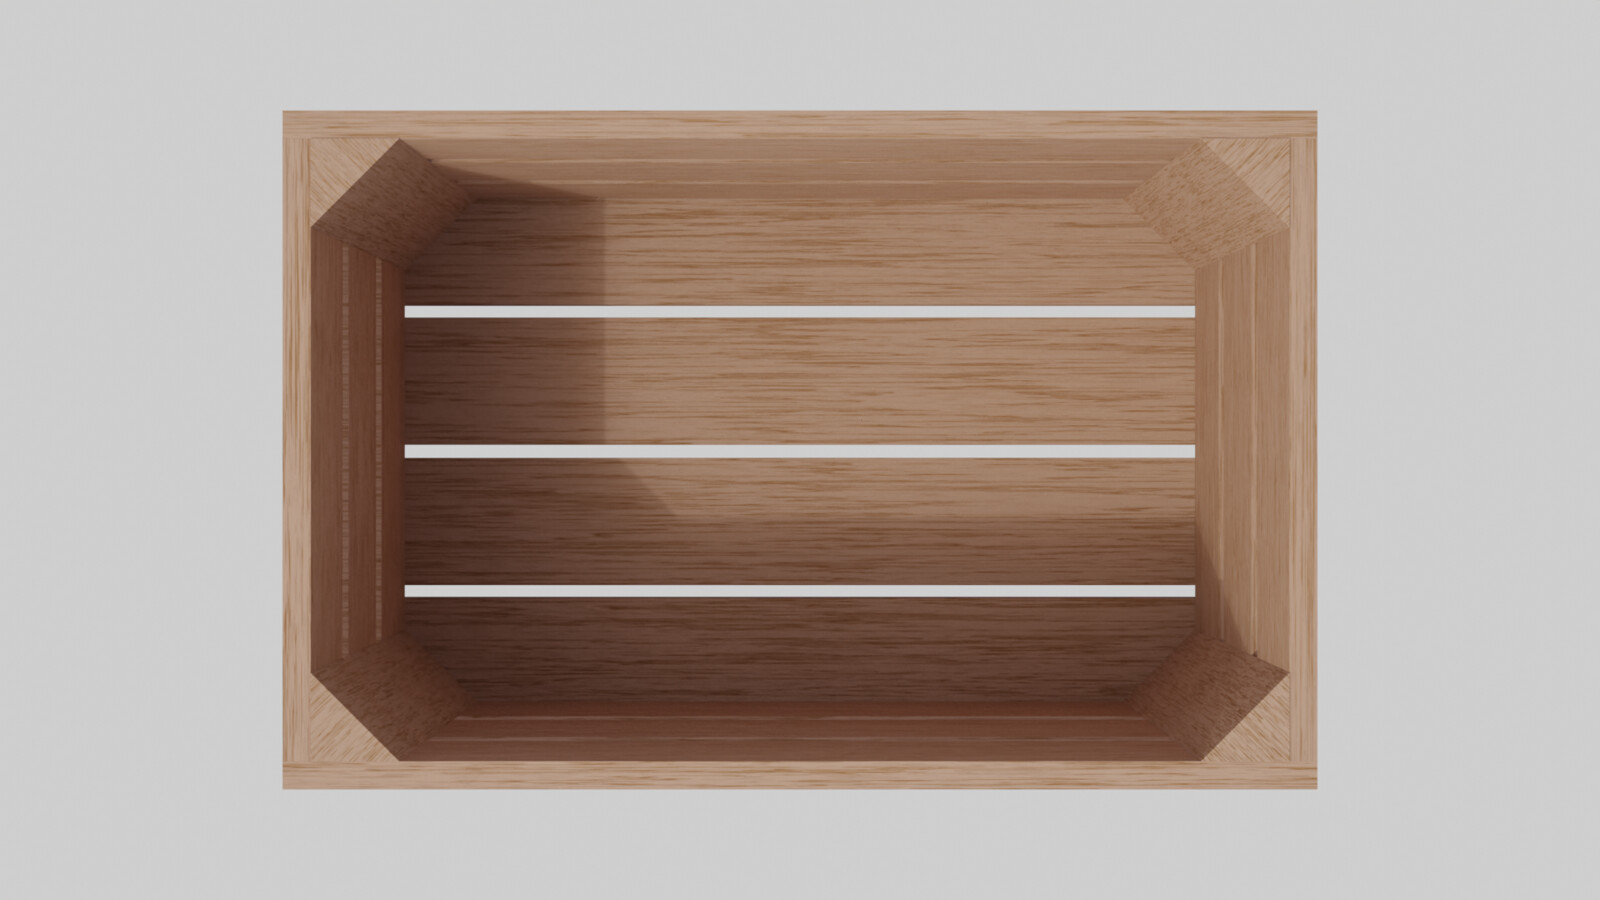 Wooden Crate without burn marks render 3